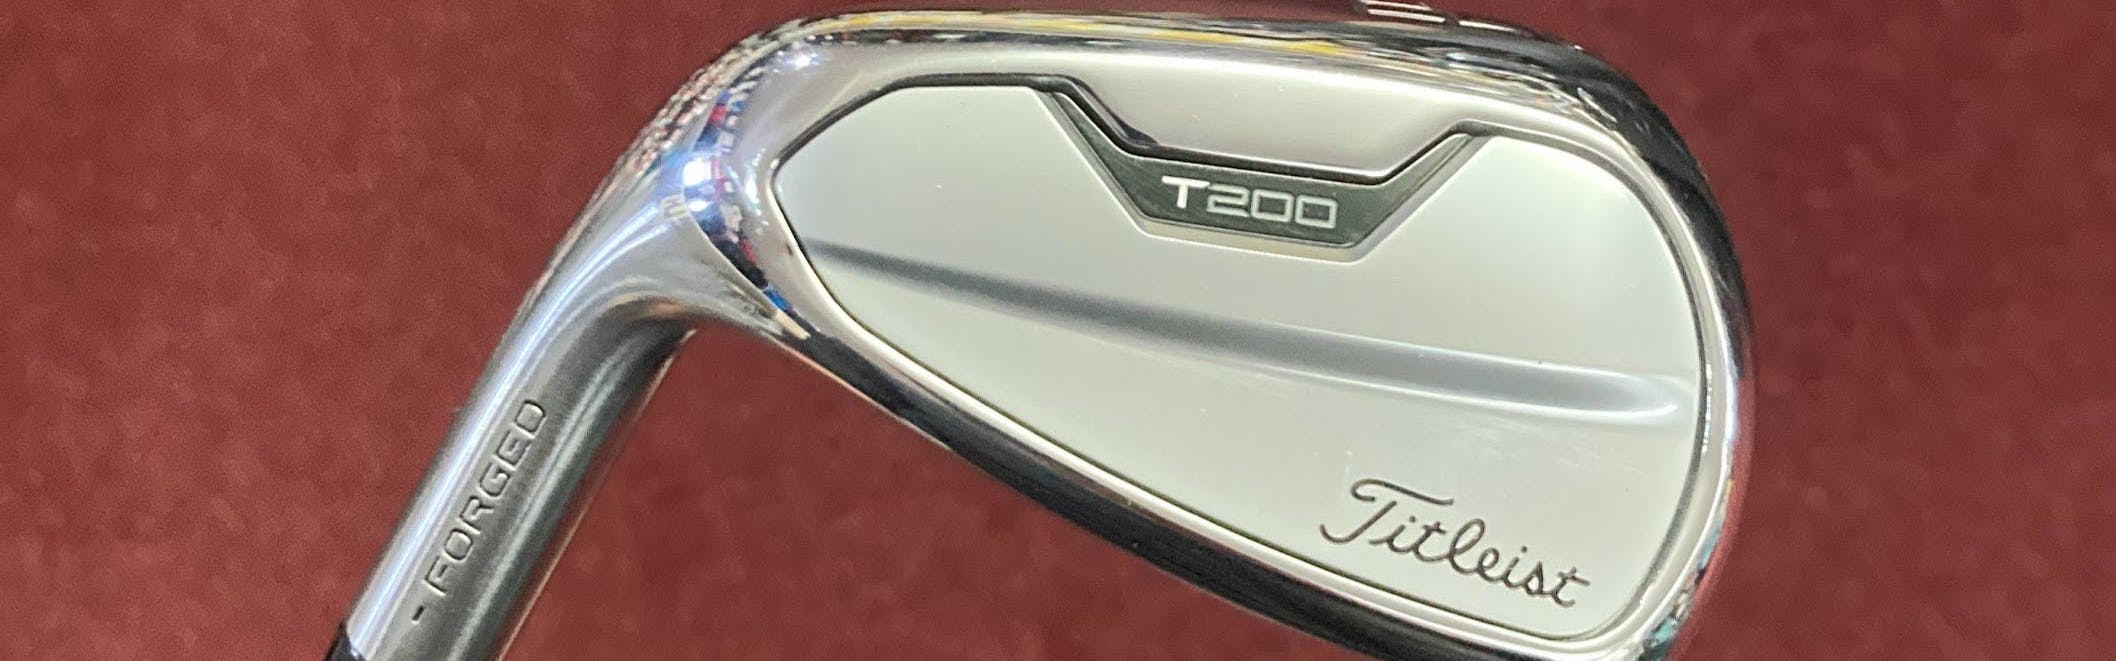 One of the Titleist T200 Irons.